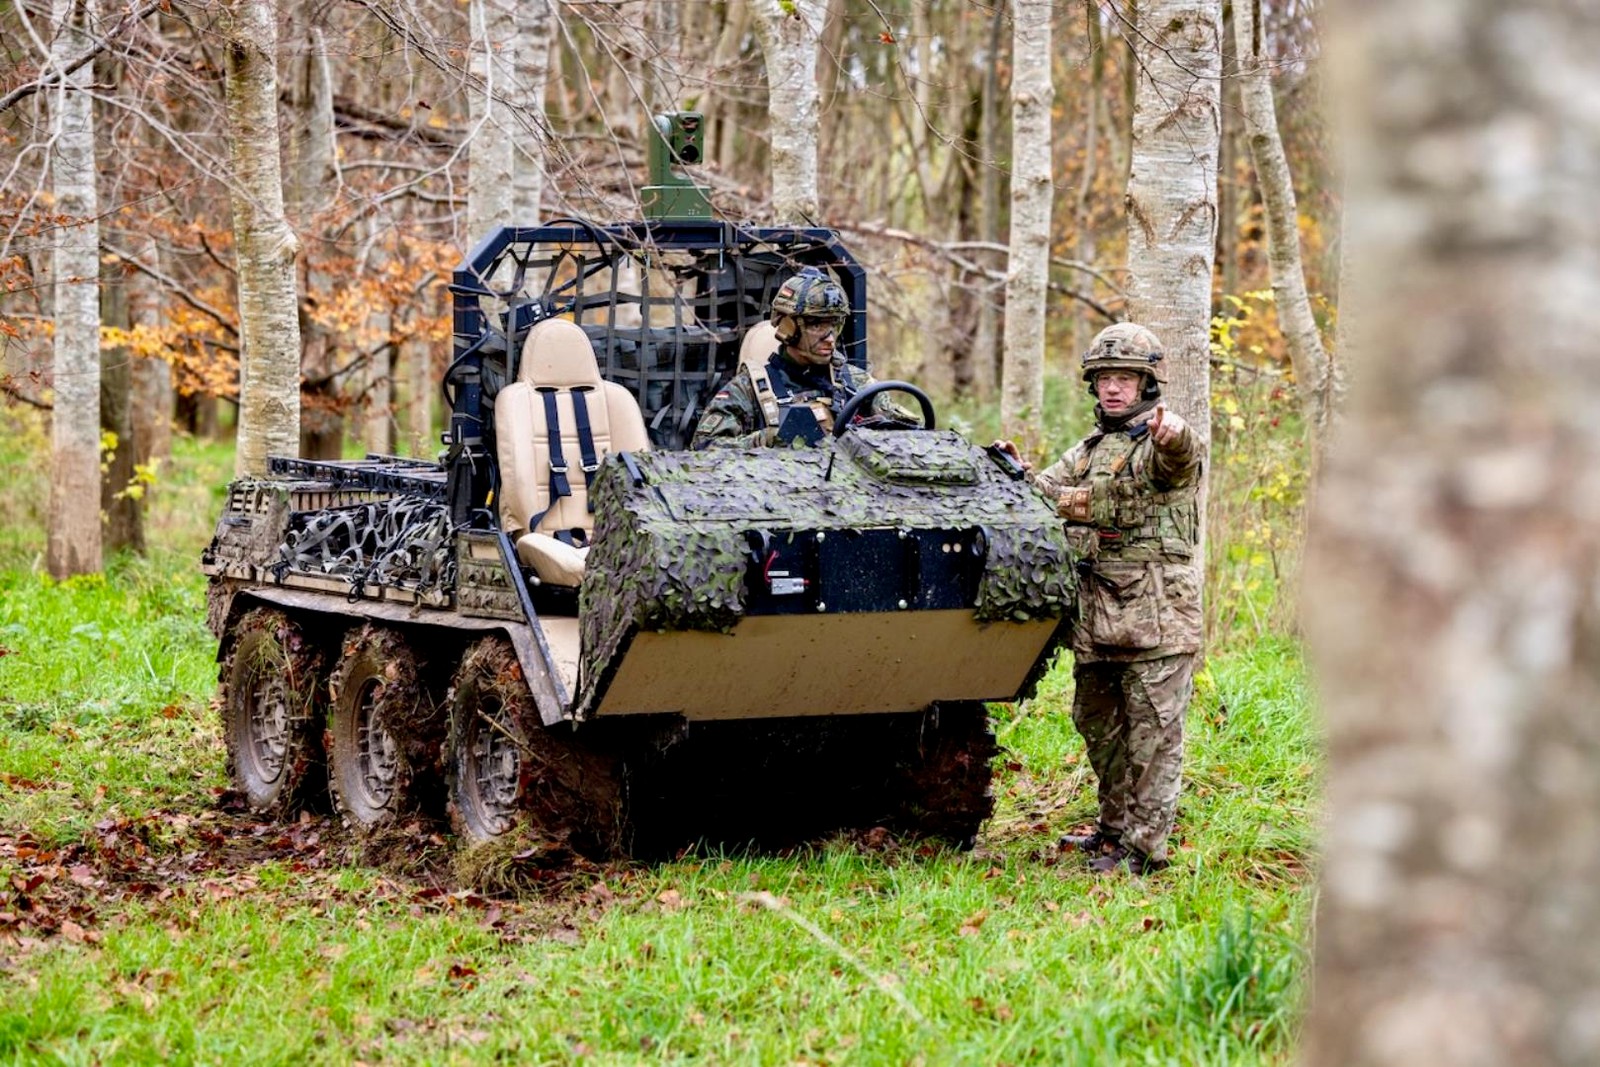 Working alongside each other British and German Service personnel test the HAWC vehicle which can be either driven or remotely piloted.
Soldiers from The Army Experimentation and Trials group have been deployed to Copehill Down on Salisbury Plain as a part of Exercise Blunting Strike in order to test potential new equipment for the Army.
Soldiers from The British Army were working alongside soldiers from the USA, France, Italy, Germany and Spain to develop both an understanding of new equipment as well as potential ways of integrating and working together with international partners.
Industry partners have developed pieces of equipment to provide potential solutions to Army activity and were on hand, working together with the troops, to develop and learn the ways the equipment could be used as well as current limitations.
Ex Blunting Strike is an important Army experimentation activity as a part of the Army Warfare Experiment (AWE). The British Army intends to accelerate transformation under Future Solider by engaging effectively with Industry to present its hypothesis to seek potential solutions from emerging technologies to inform future capability development.
 AWE Level C is the third stage of the AWE process. Level A centres around a Dragon’s Den type scenario where Industry answer a specific problem set articulated by The British Army. In this iteration Industry providers have been asked to provide solutions to Urban warfare problems such as countering drones and providing medevac in built up areas. Level B was the safety testing phase and Level C sees the equipment now in the hands of soldiers for user testing and experimentation.
